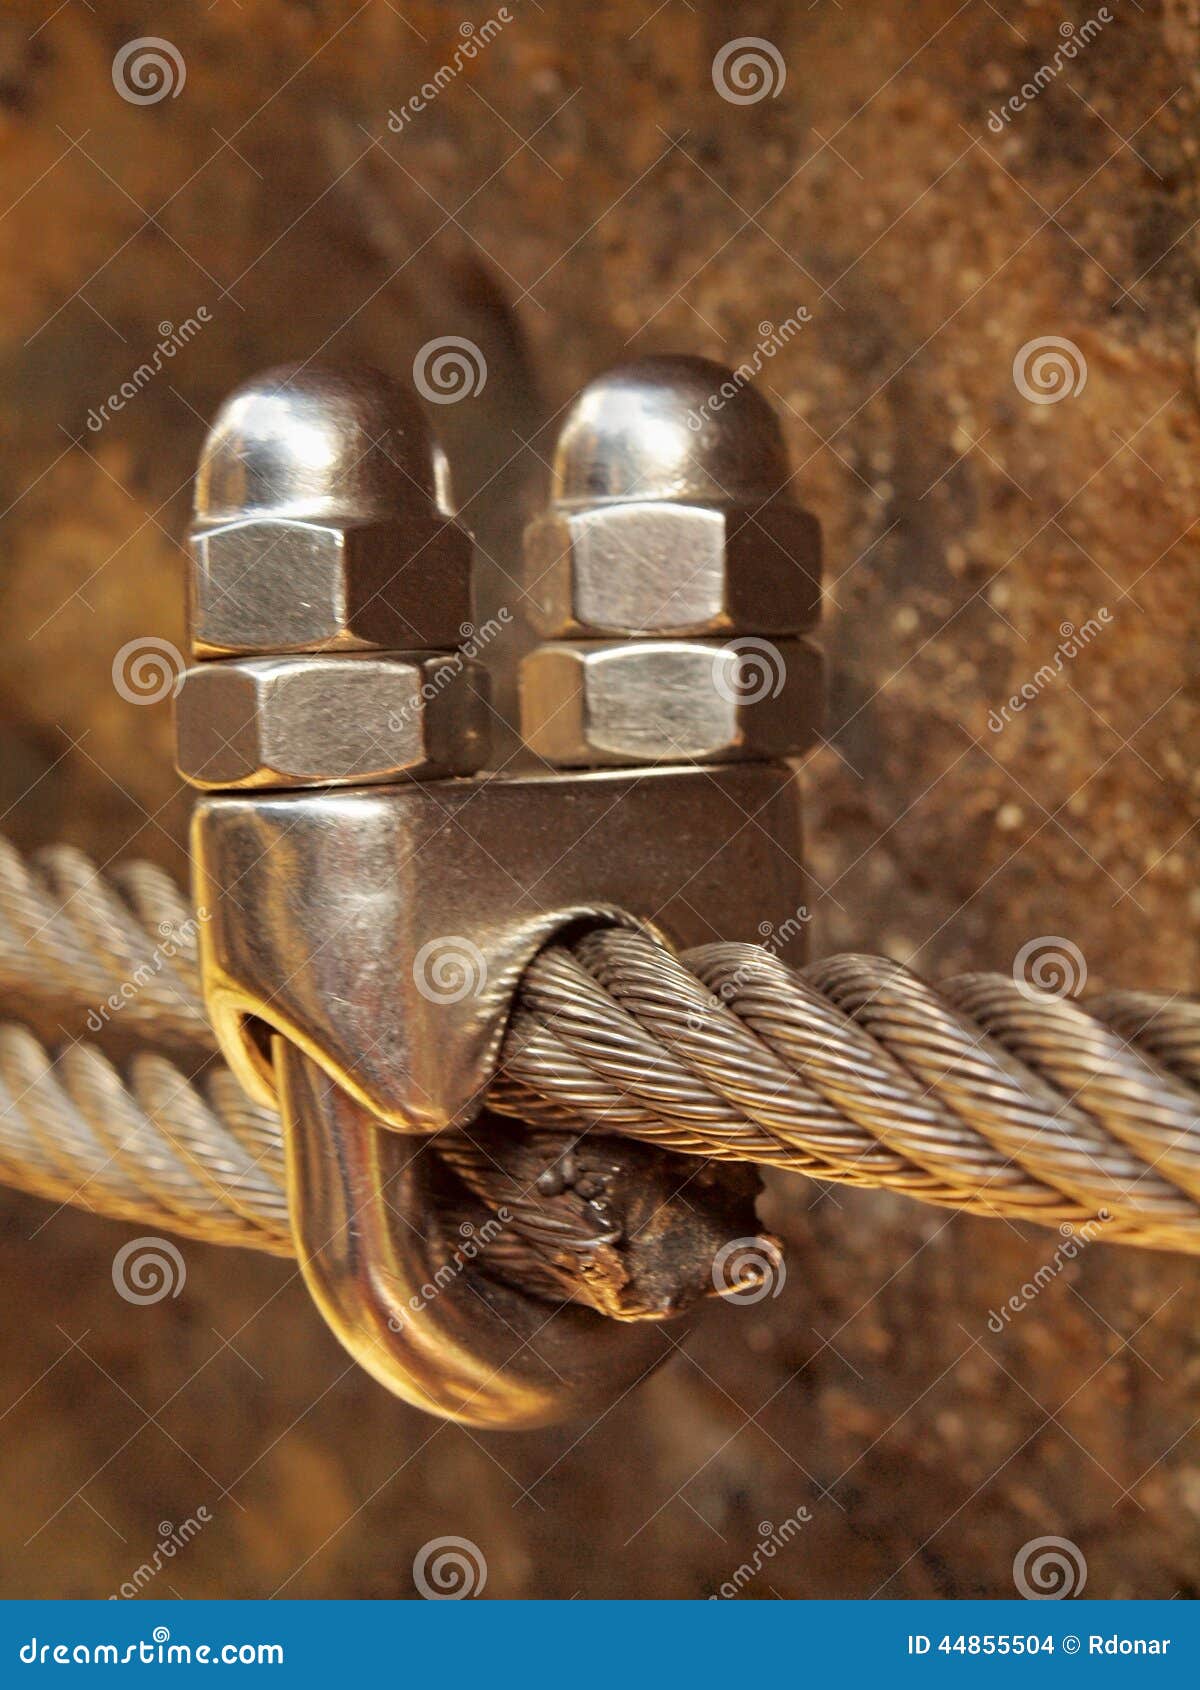 https://thumbs.dreamstime.com/z/detail-screw-clamp-end-irone-rope-climbers-iron-twisted-rope-fixed-block-screws-snap-hooks-anchored-rock-44855504.jpg